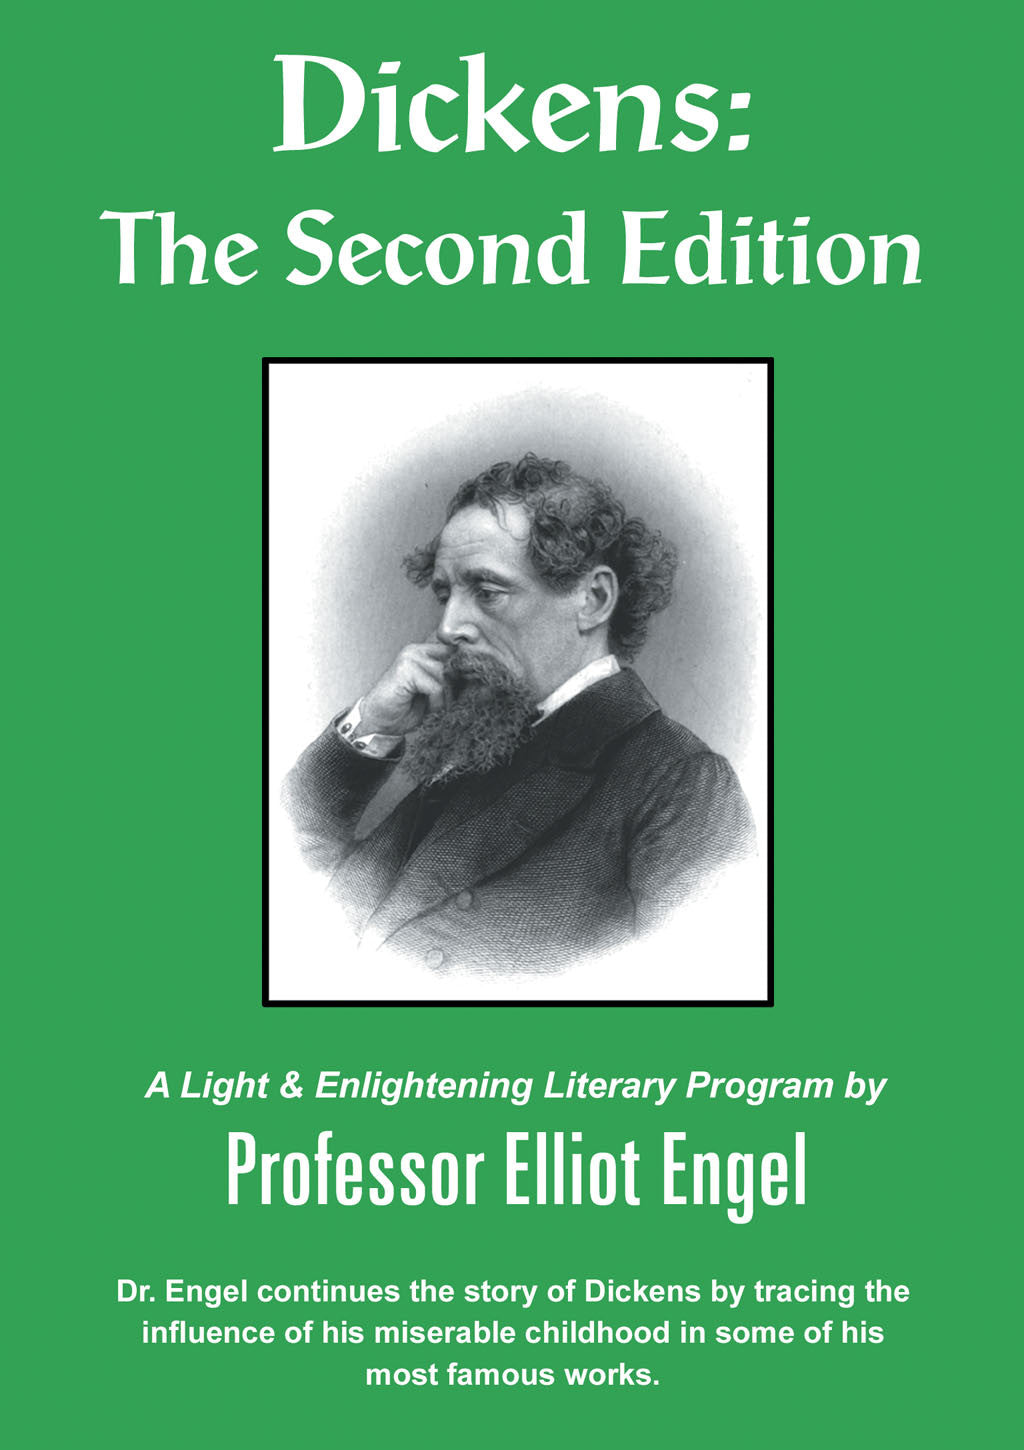 Dickens: The Second Edition